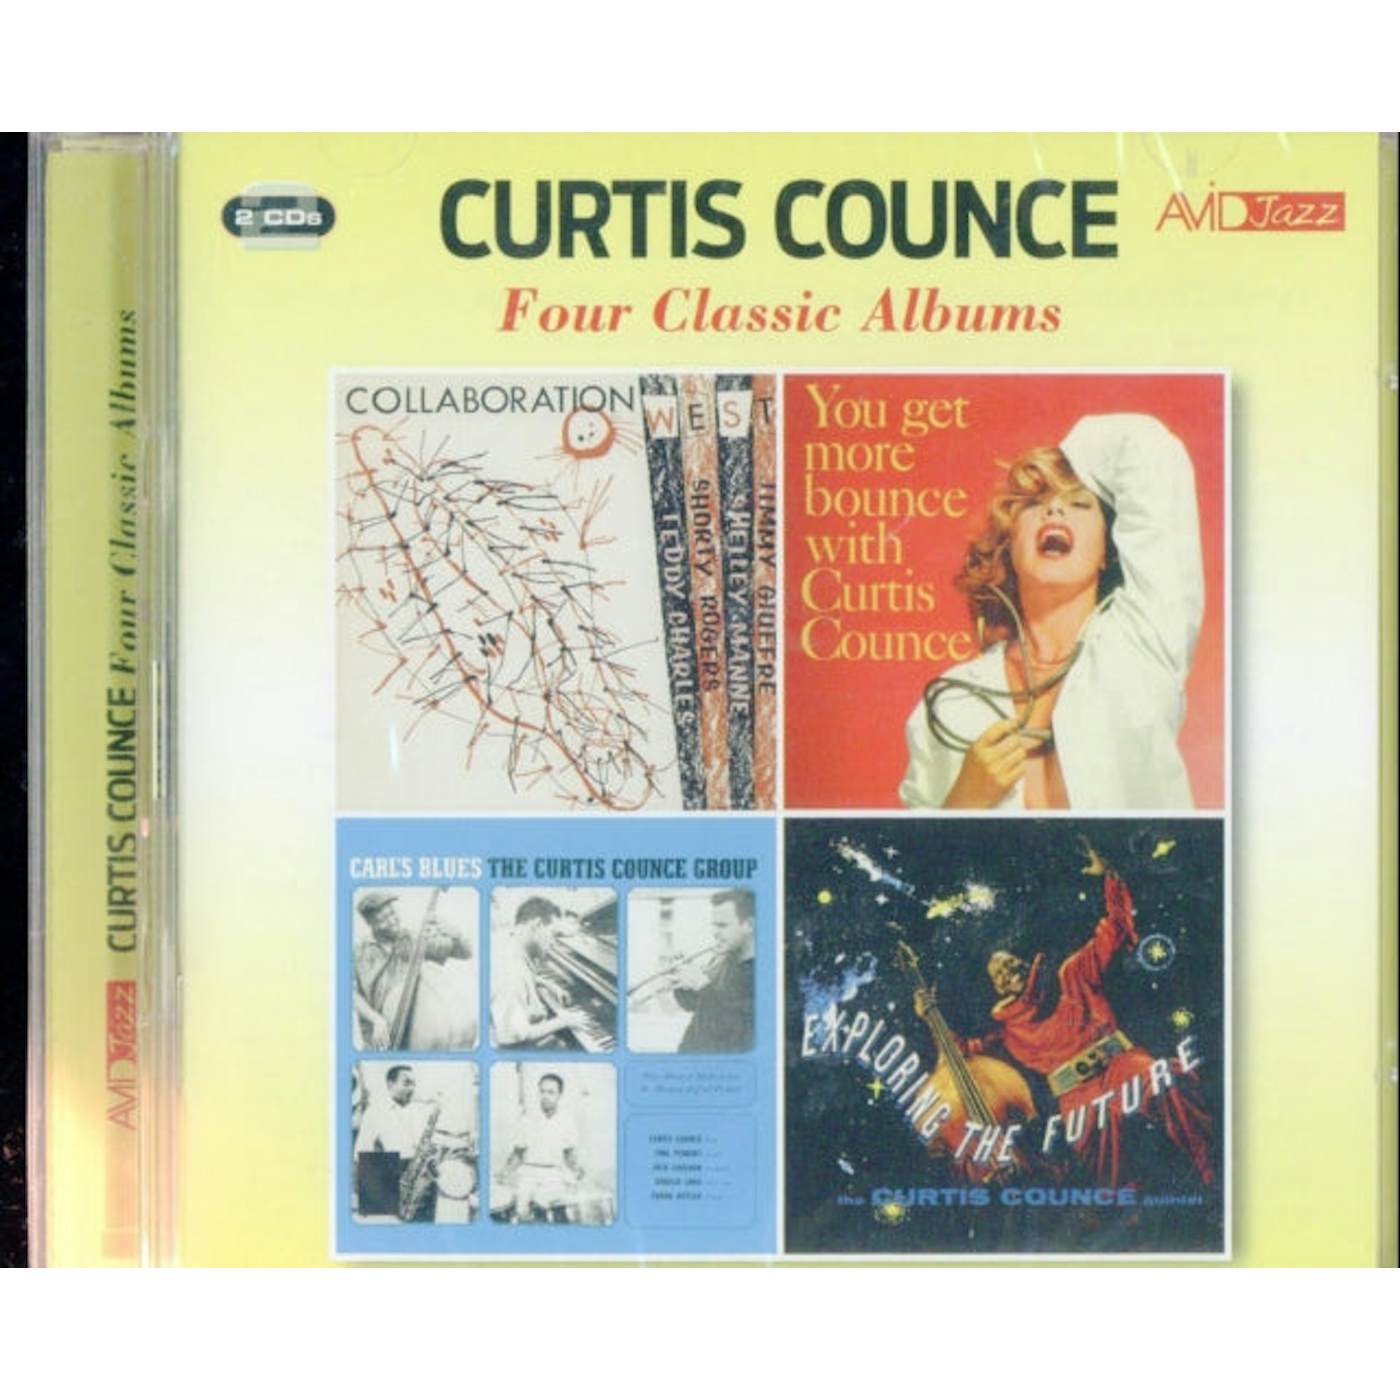 Curtis Counce CD - Four Classic Albums (Collaboration West / You Get More Bounce With Curtis Counce / Exploring The Future / Carl's Blues)